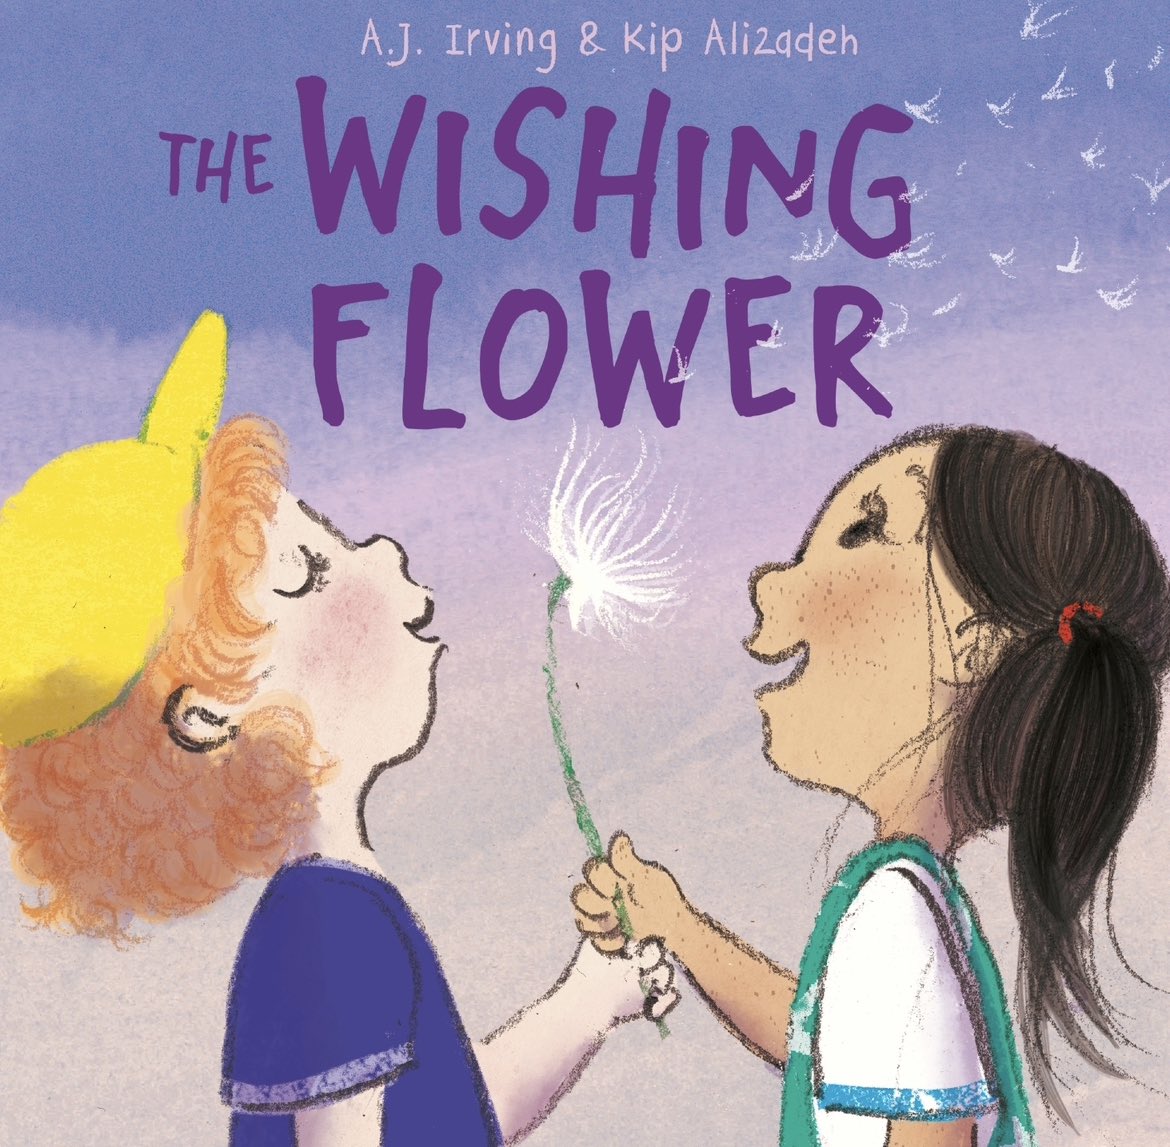 LGBTQ+ book bloggers! THE WISHING FLOWER by @kipalizadeh and me comes out just in time for Pride. I’d love to connect with you & share an eARC of the queer girl PB of my heart! 🌈💖 #queerkidlit #LGBTQ #picturebook penguinrandomhouse.com/books/678286/t…